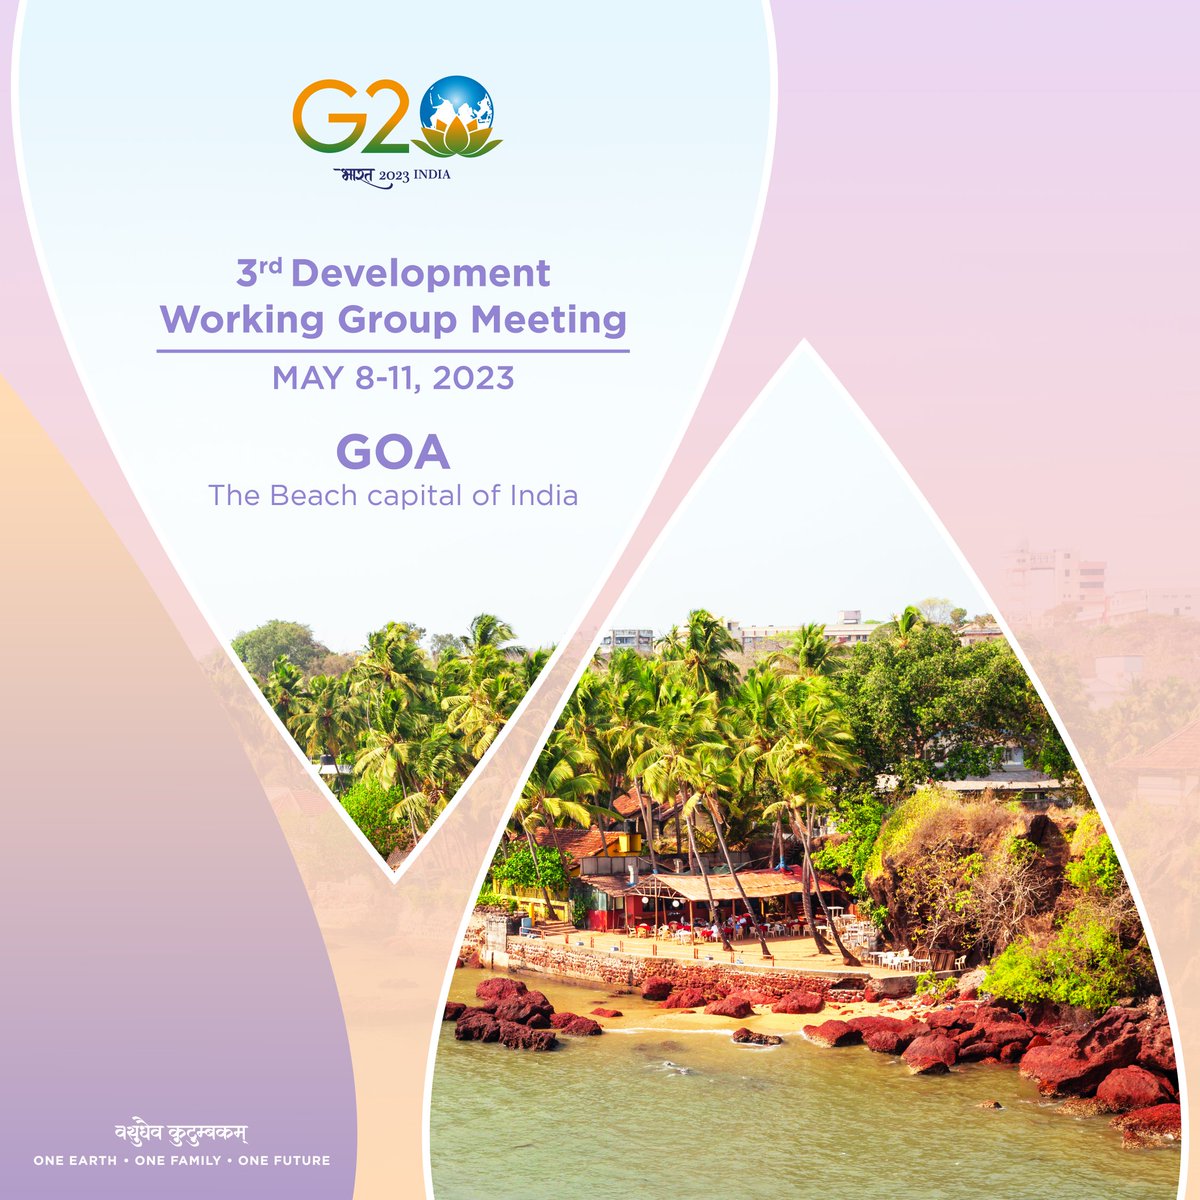 Svāgatam, #Goa! 🙌 🌴

The Beach Capital of India is all set to host delegates for the 3rd Development Working Group Meeting.

The meeting will serve as a platform to discuss relevant topics from technology to women's empowerment.

🗓️ May 8-11

#G20India #G20DWG